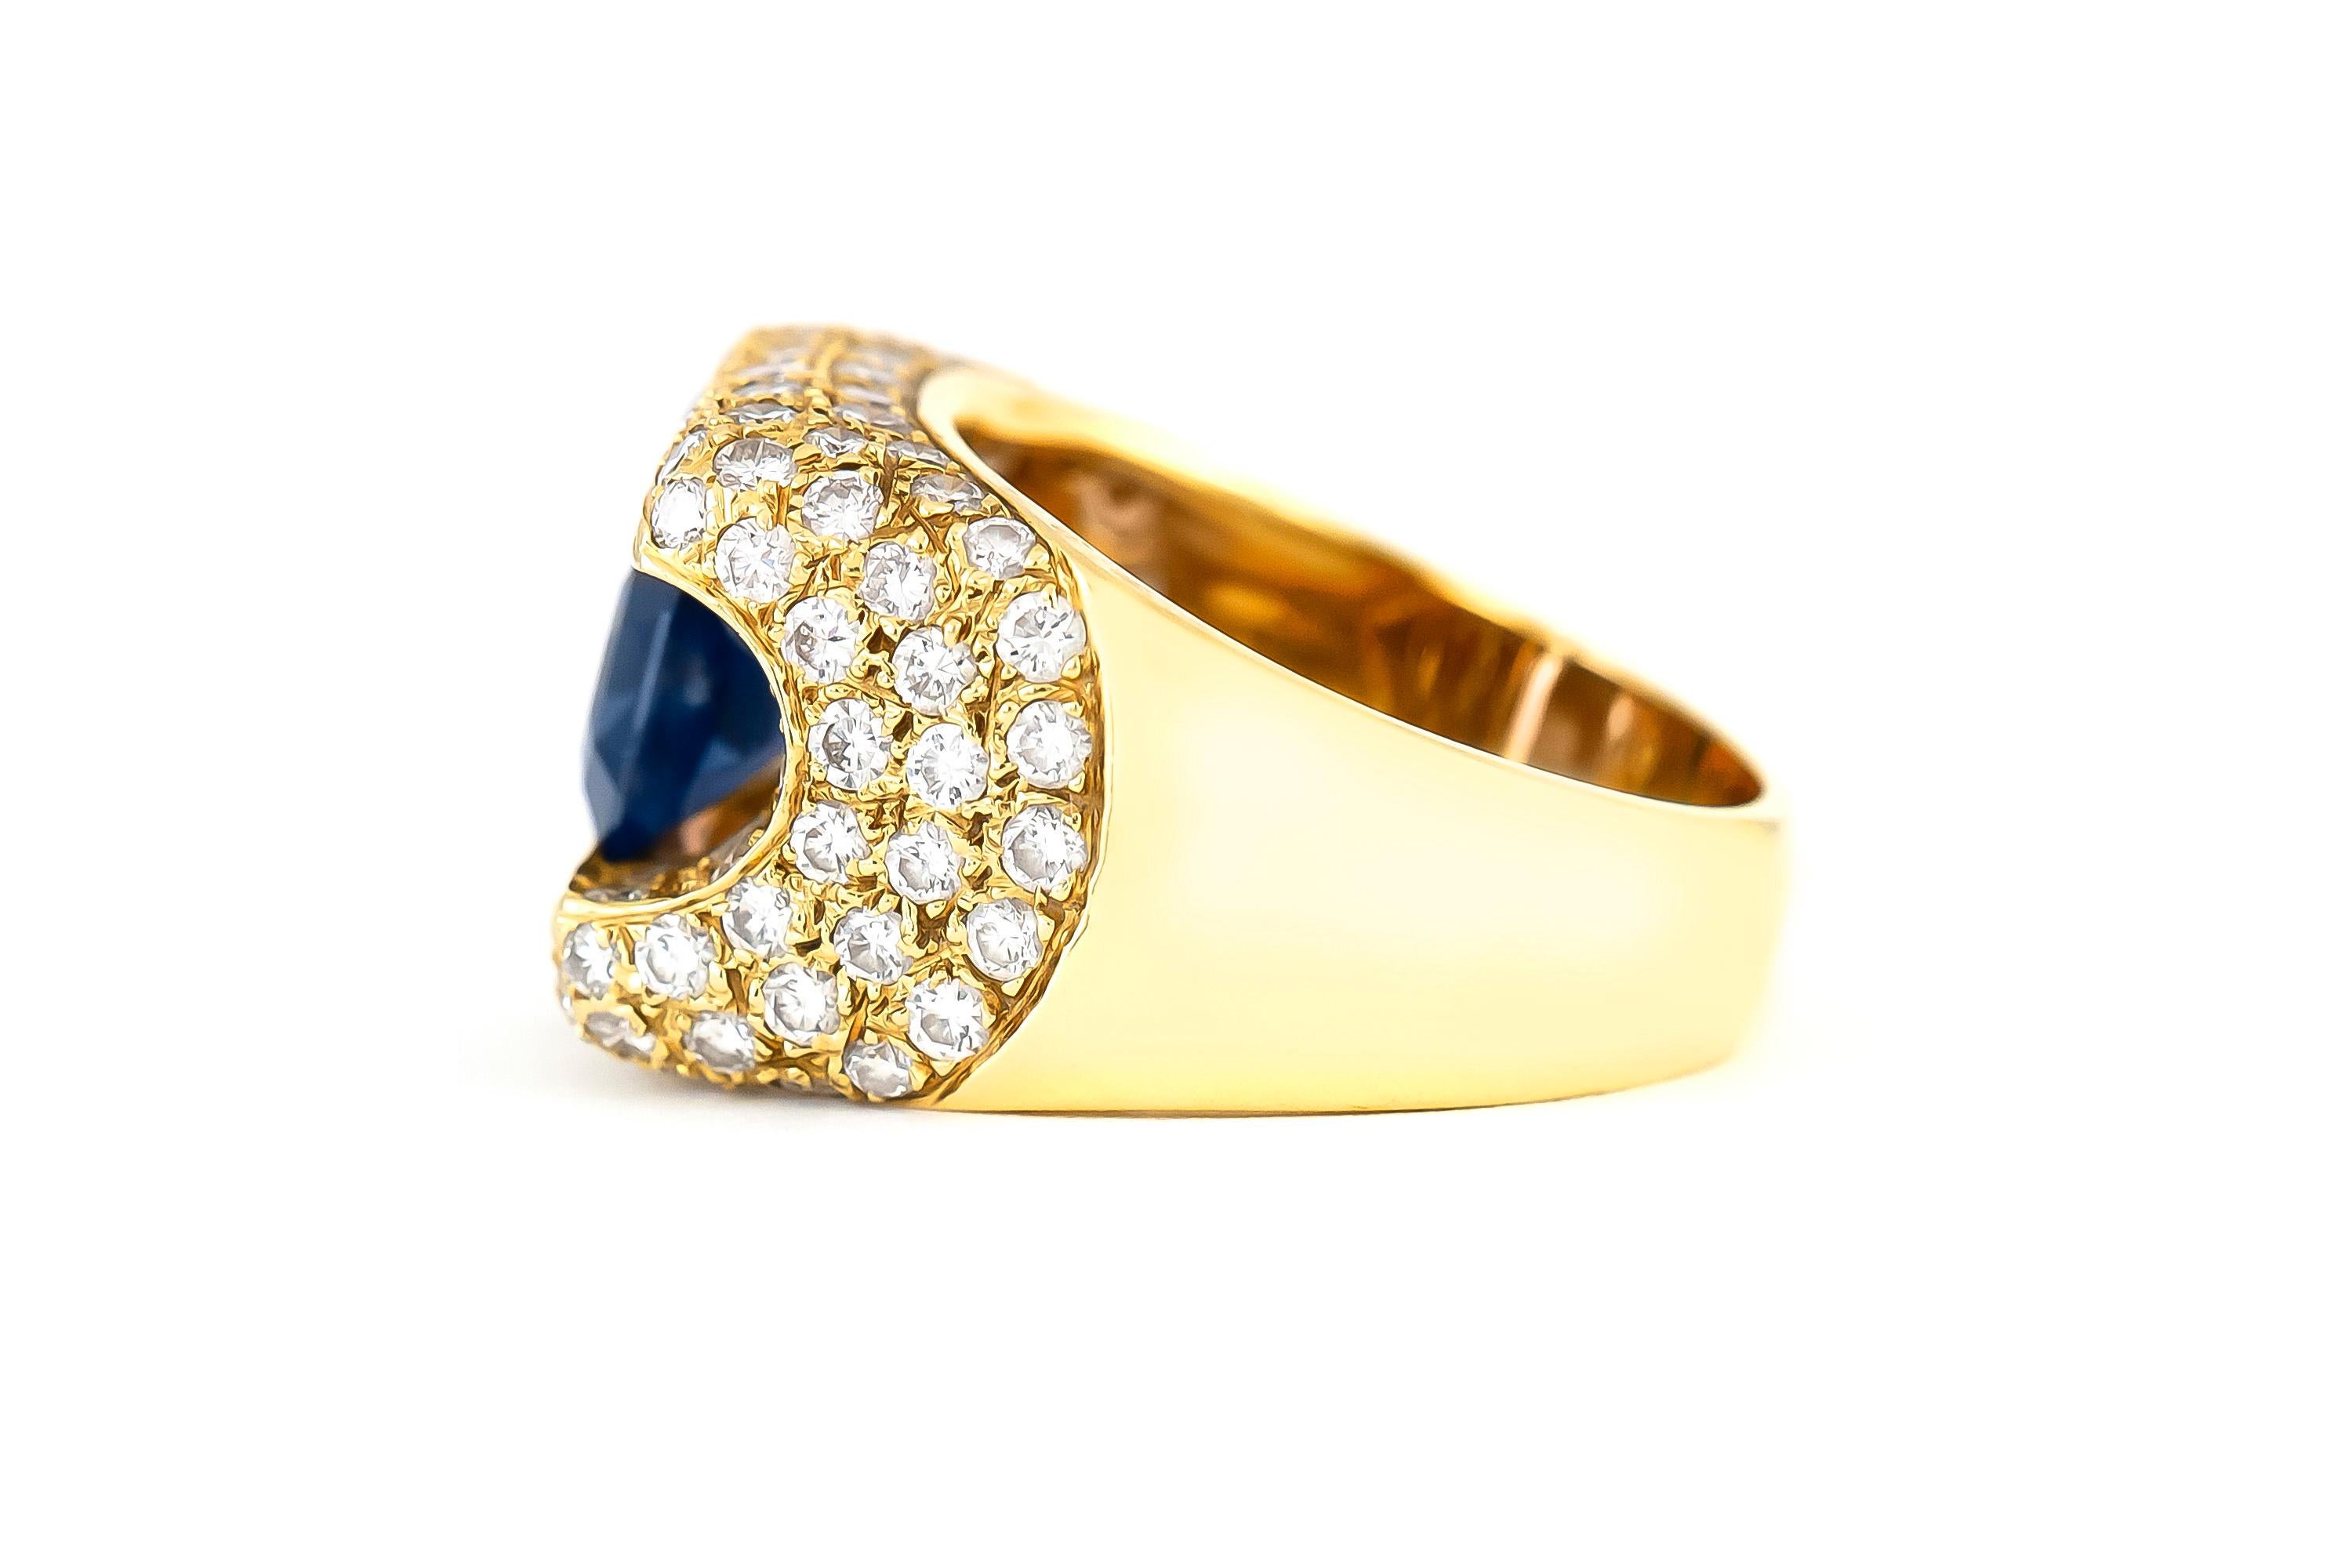 The ring is finely crafted in 18k yellow gold with sapphire as center stone weighing approximately total of 2.00 carat and diamonds weighing approximately total of 4.00 carat.
Circa 1980.